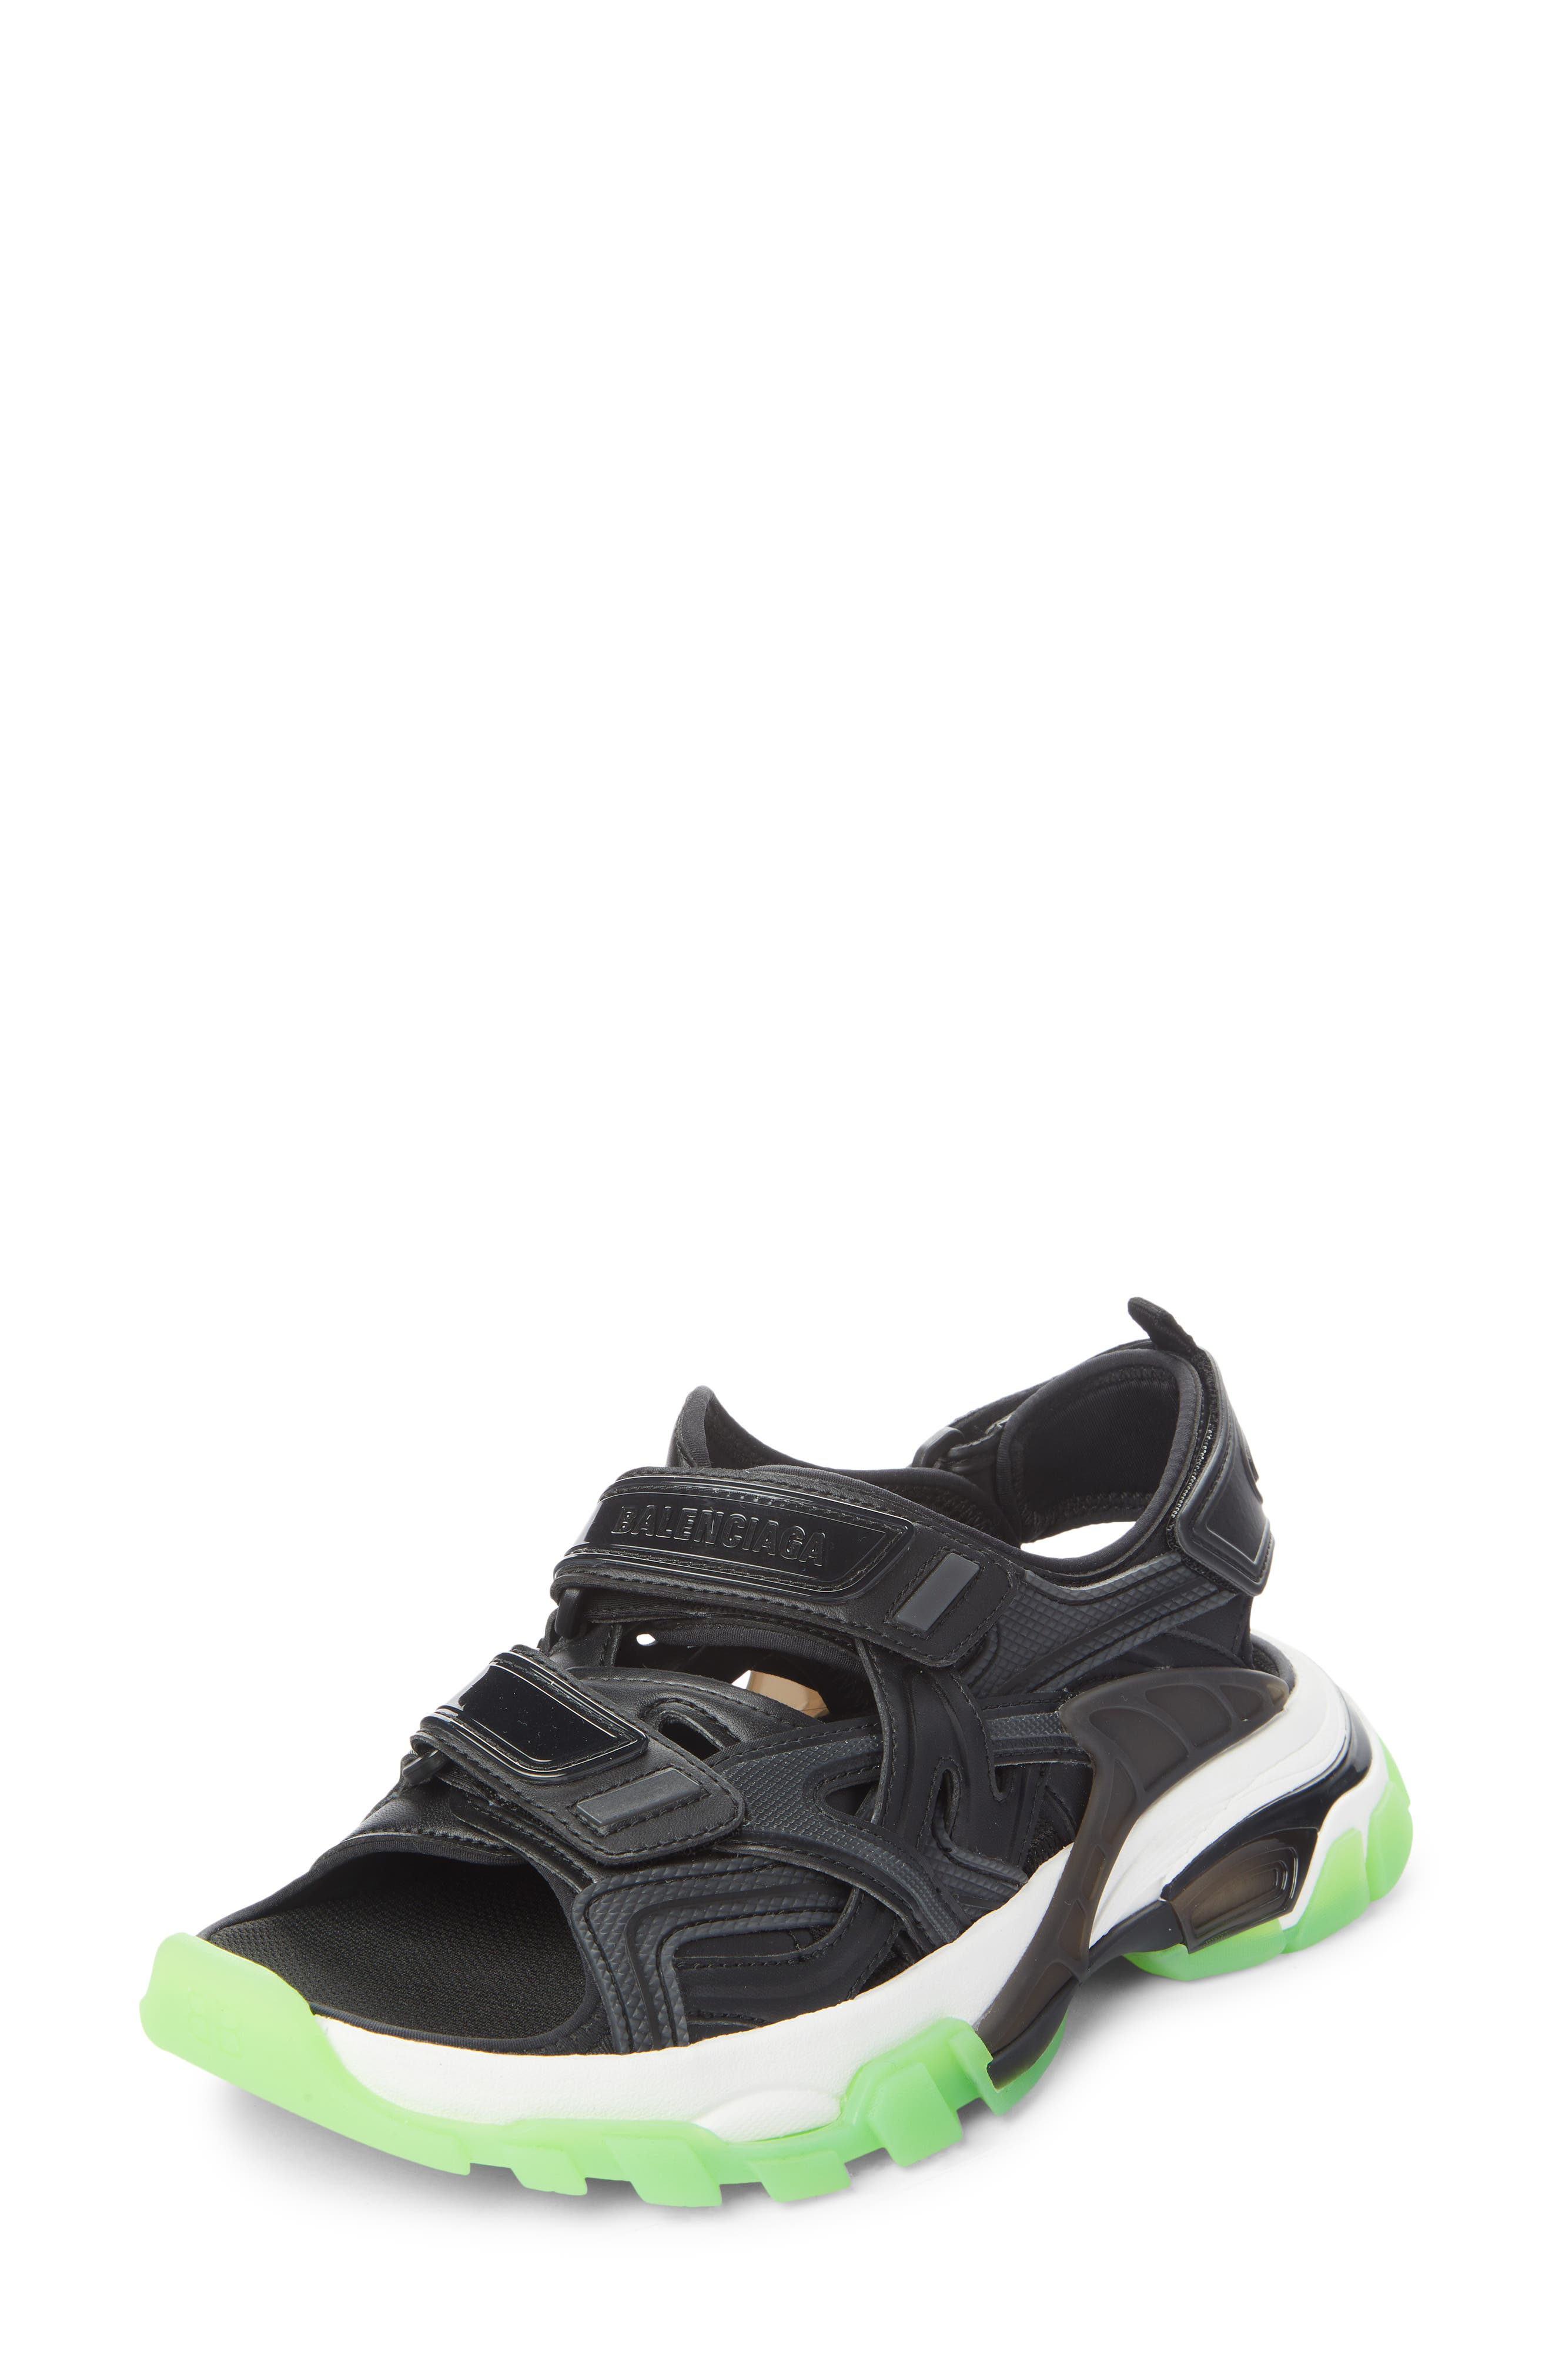 Balenciaga Track Sandal in Black/White/Fluo Green at Nordstrom, Size 12Us